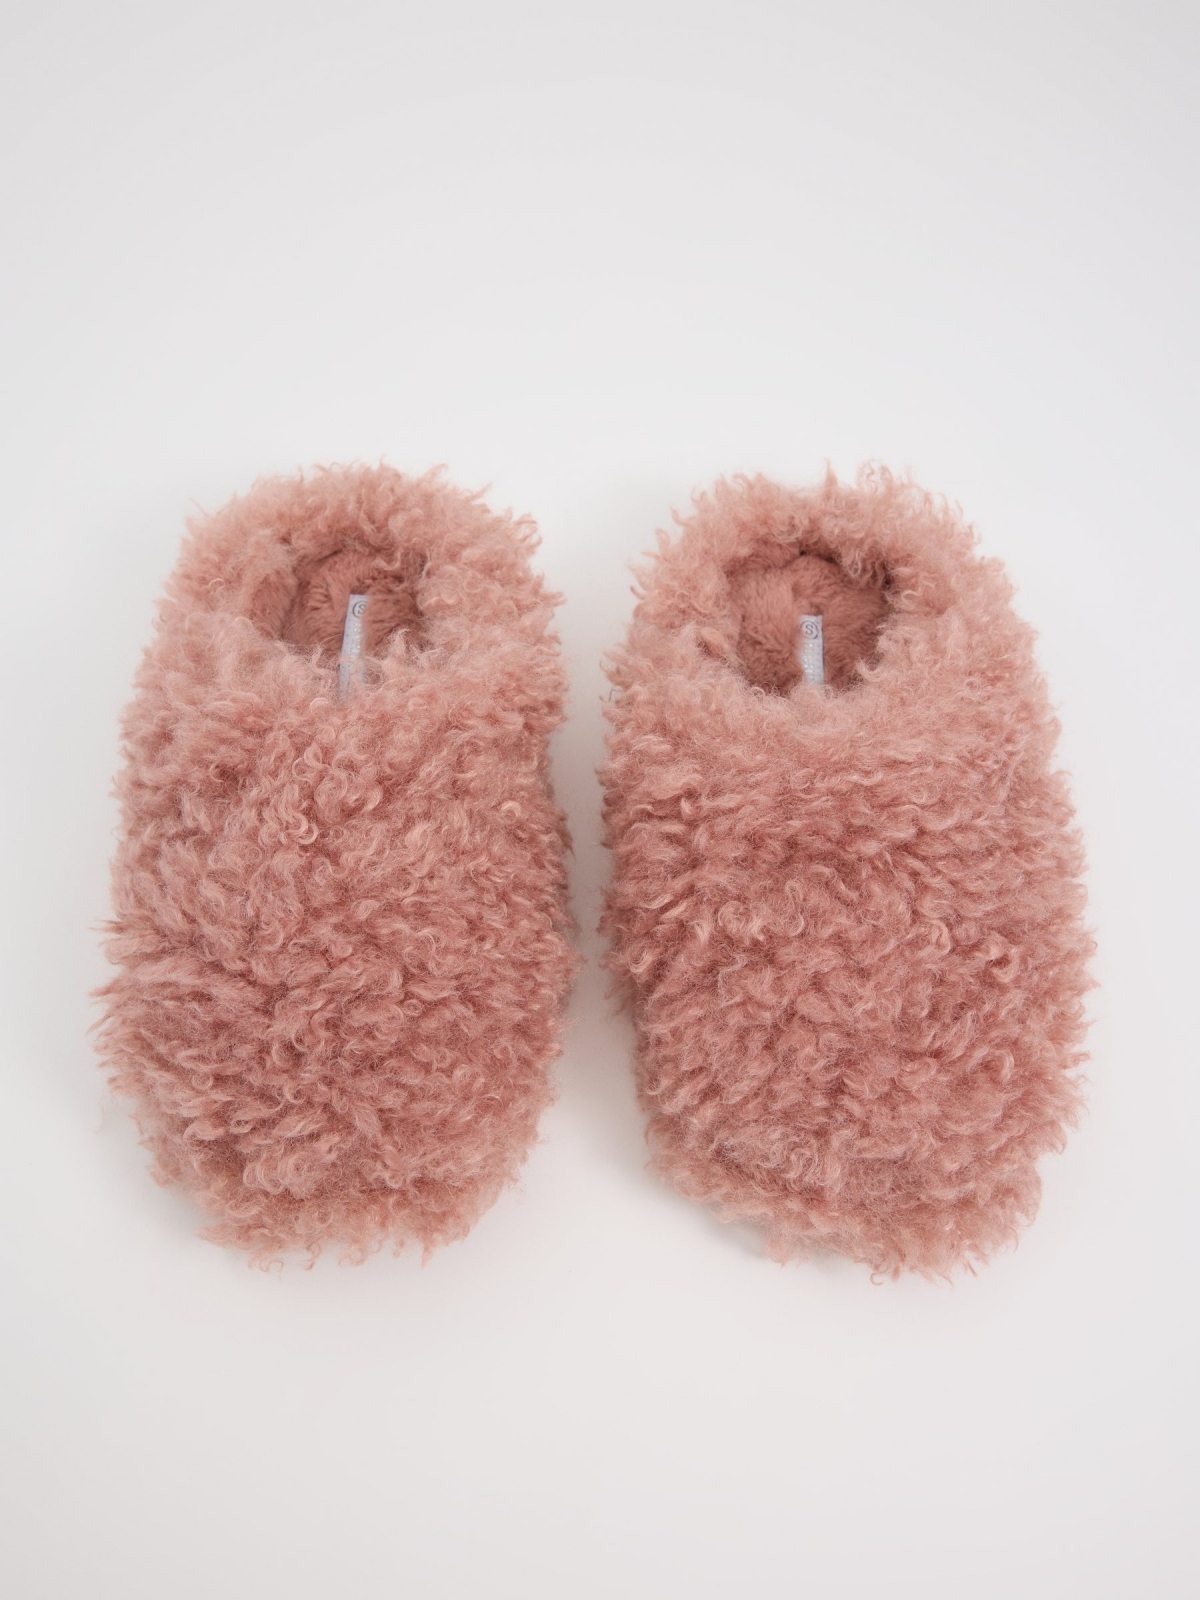 Fluffy home slippers pink foreground